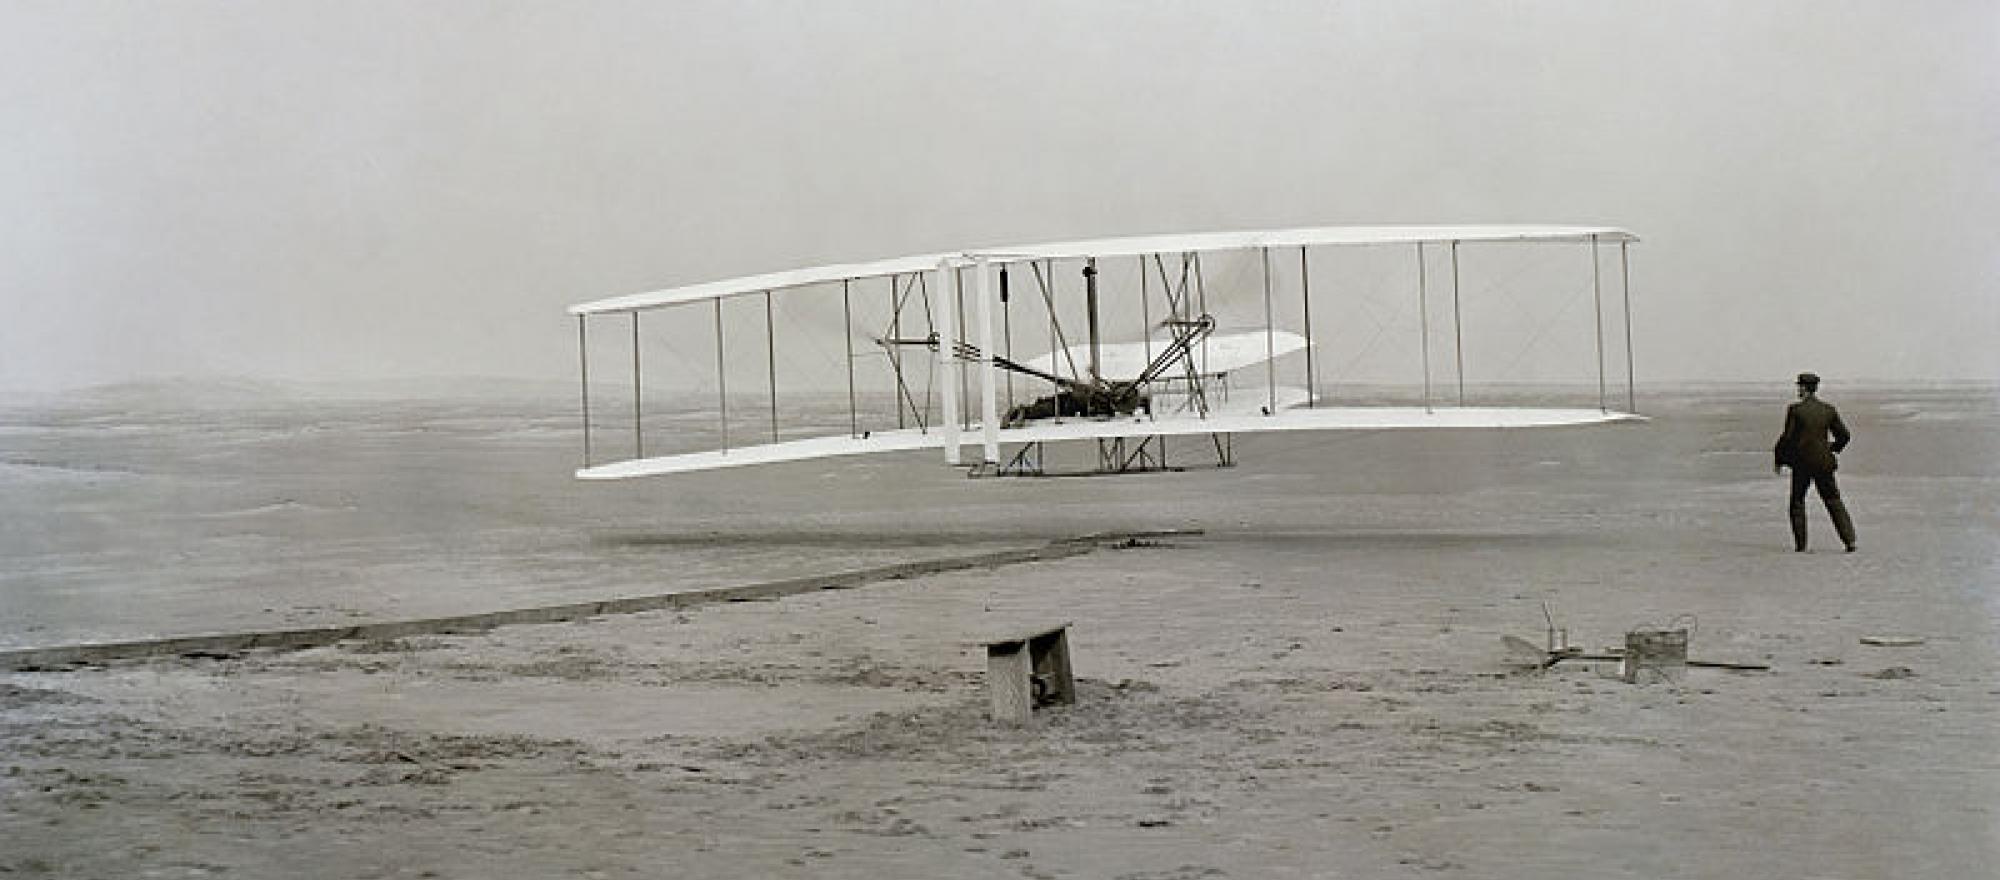 The Wright Brothers take off—only 66 years before Apollo 11.